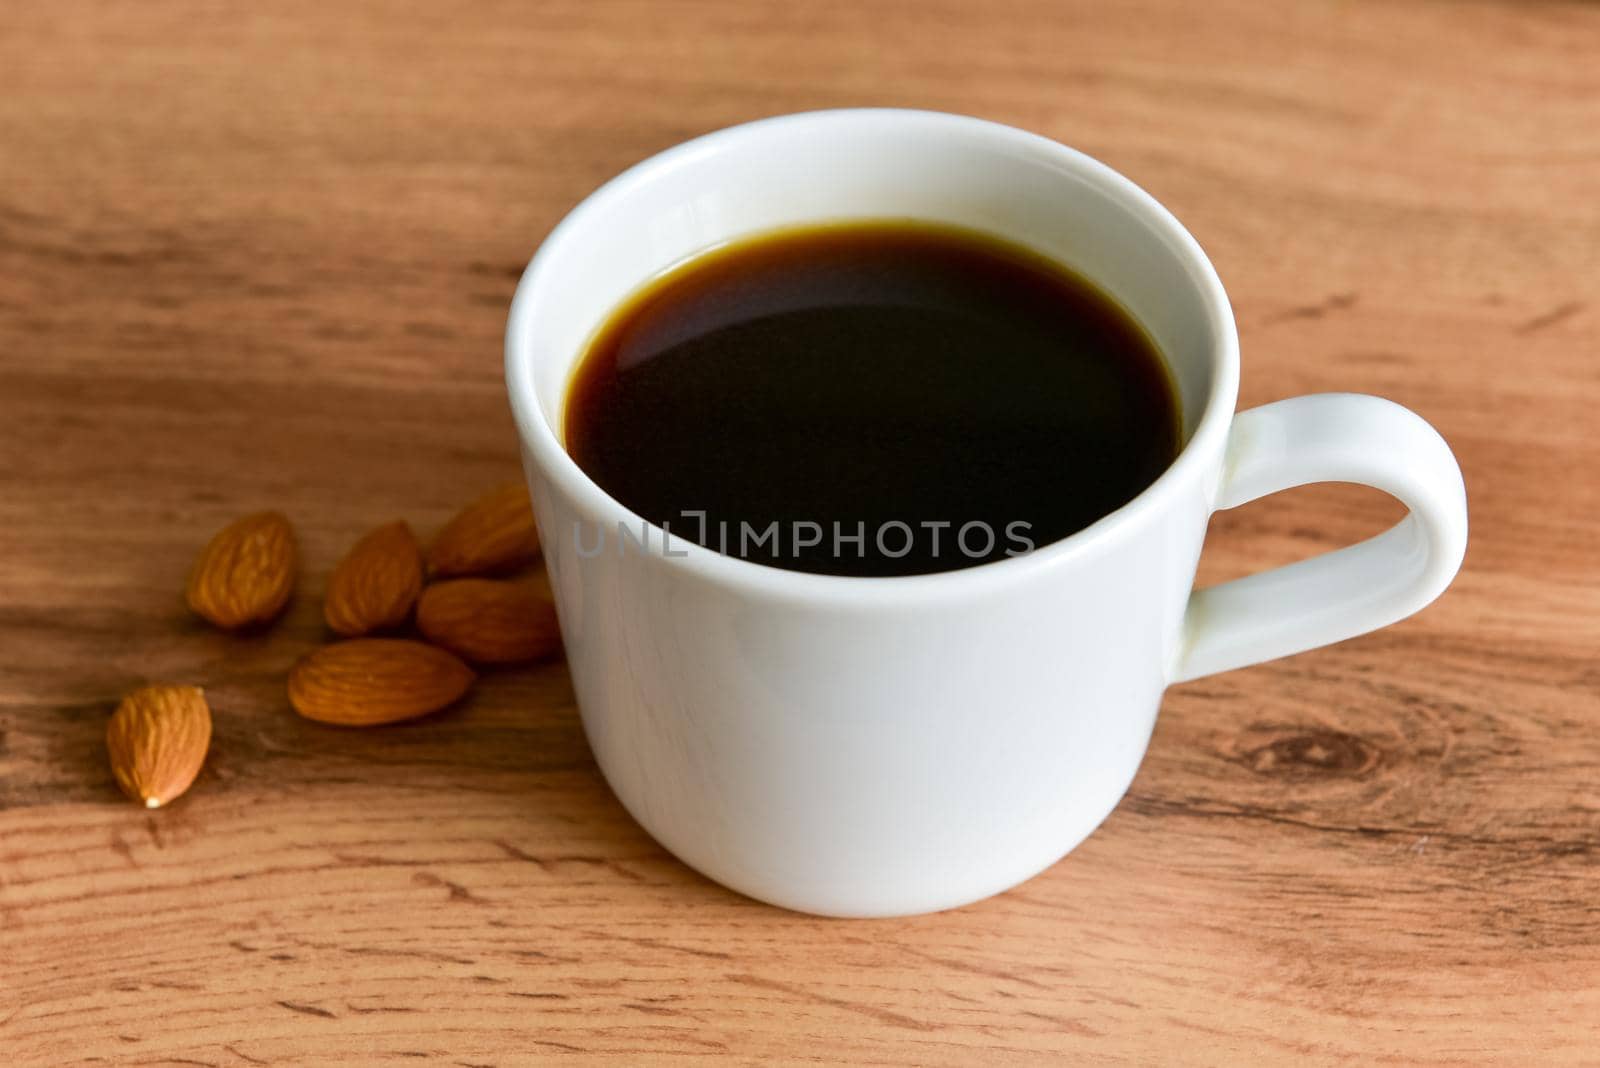 White cup of strong black coffee with almonds lying nearby on a wooden surface close-up.